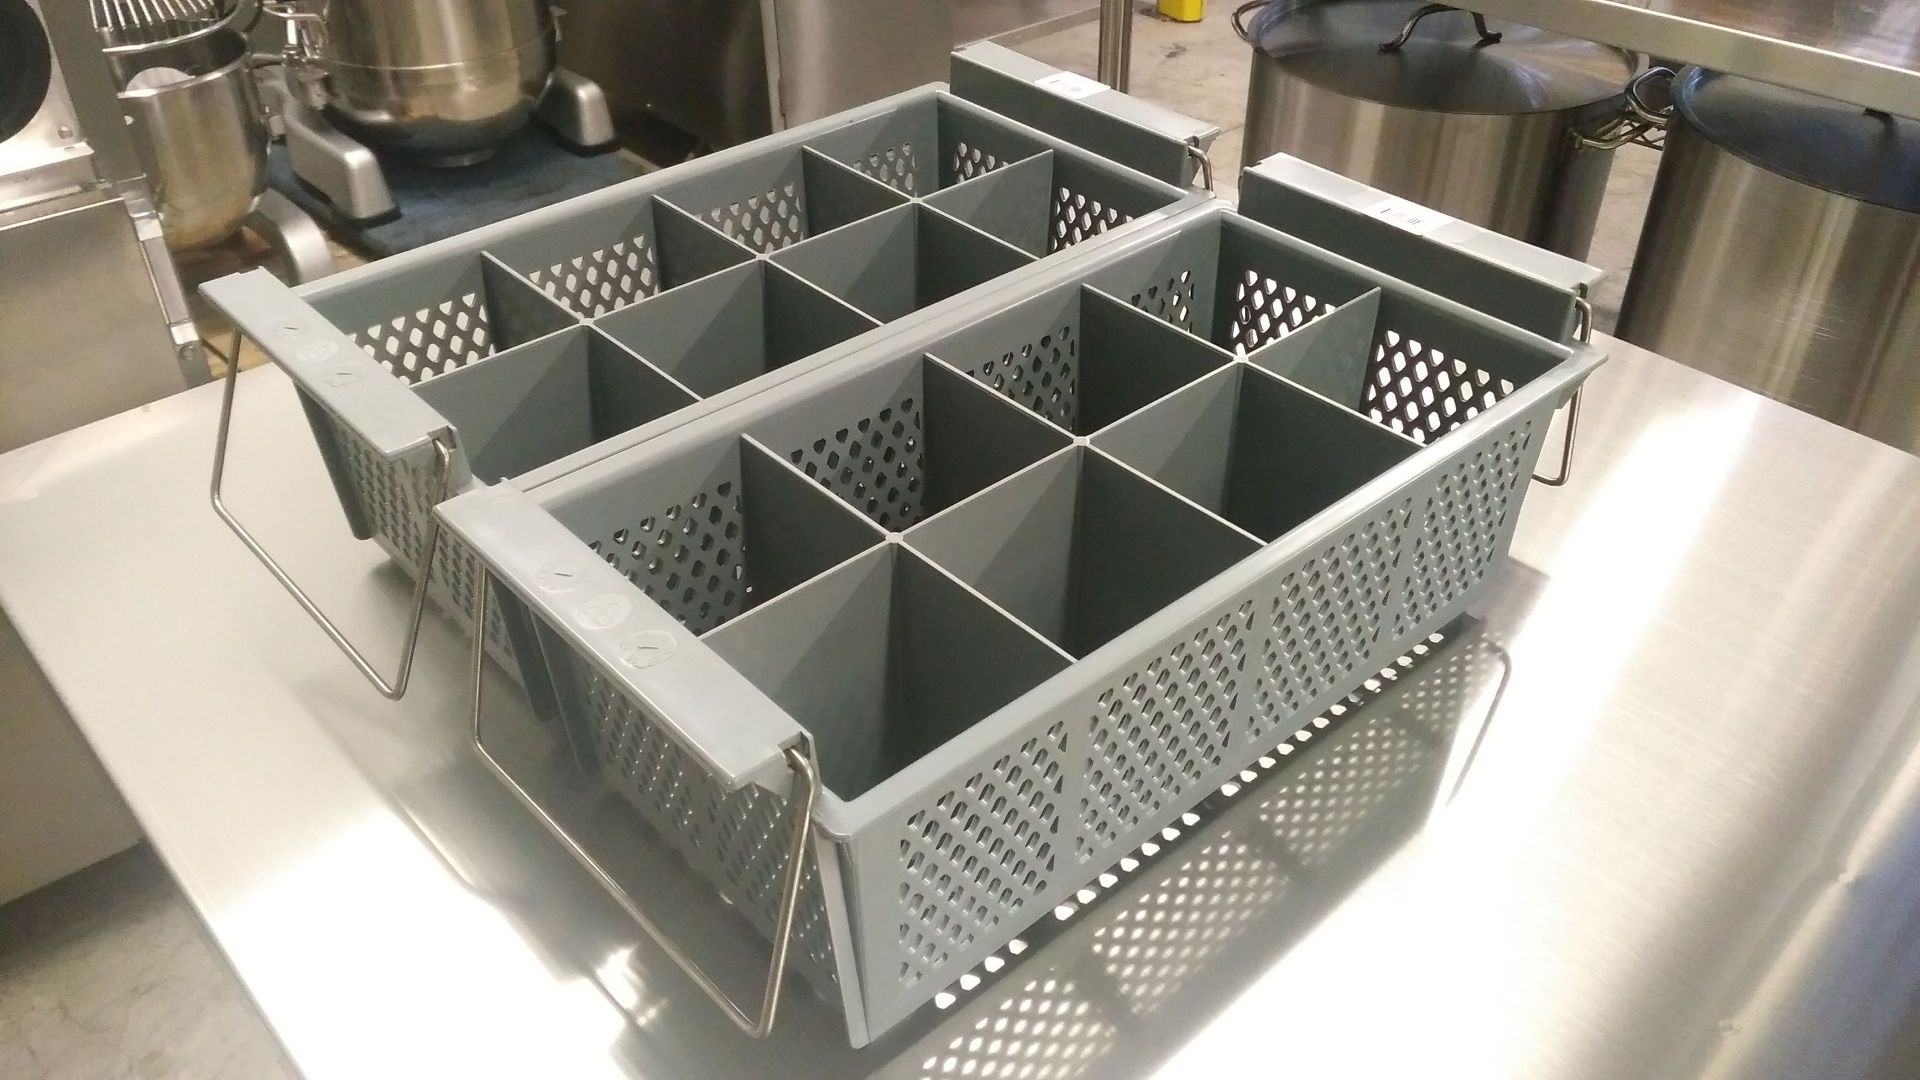 8 Compartment Cutlery Basket with Handles - Lot of 2 - Image 2 of 2